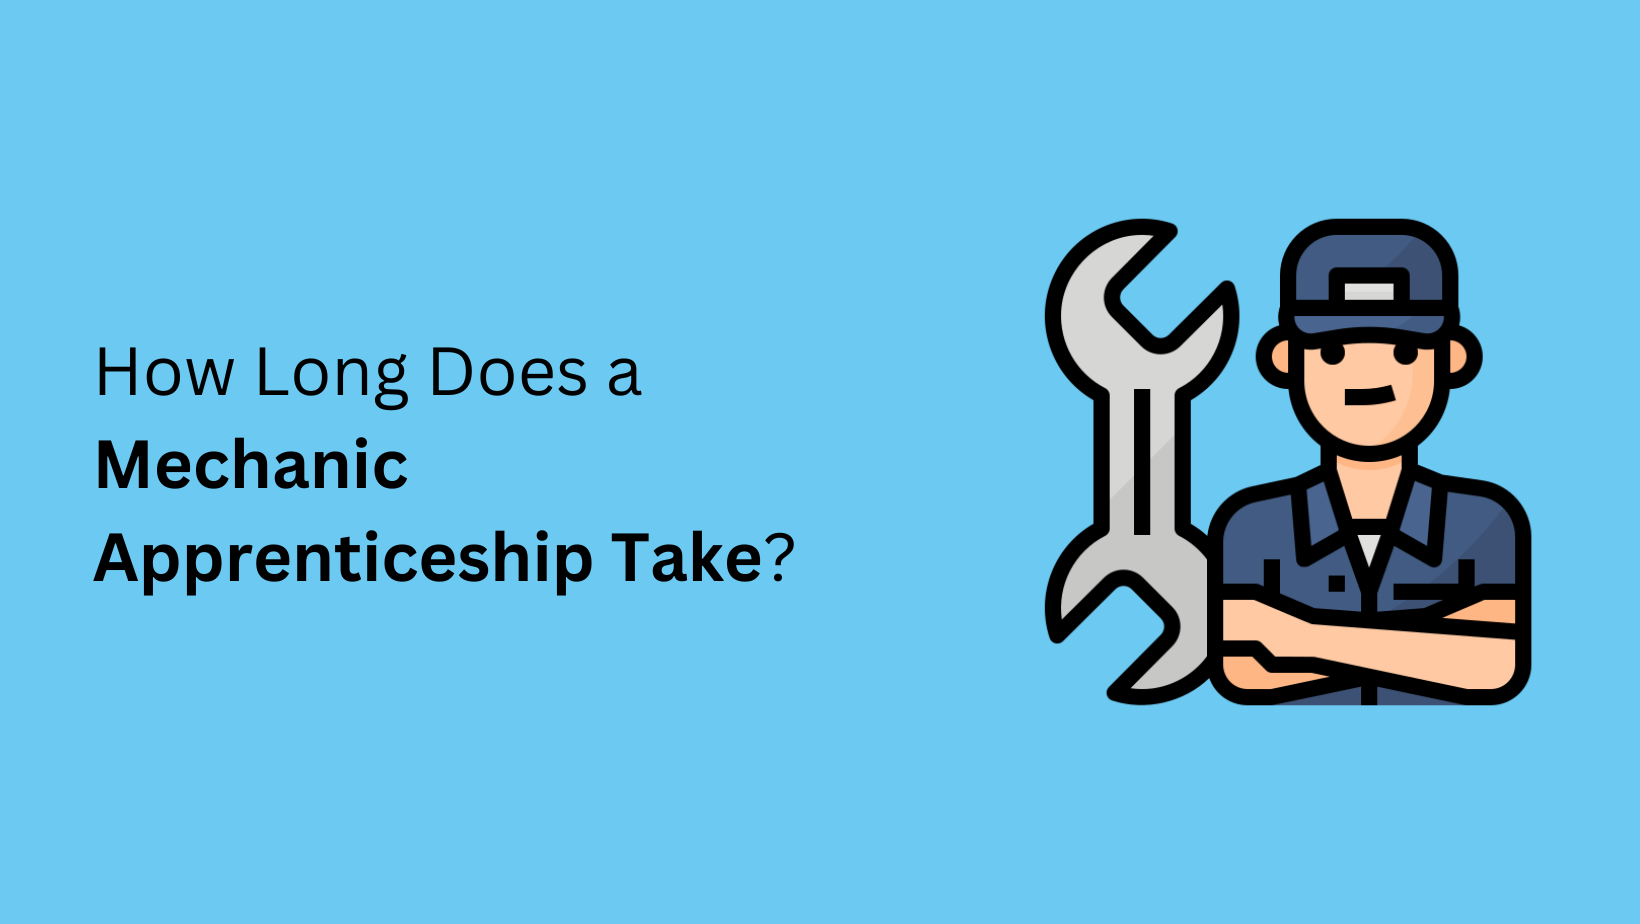 How Long Does a Mechanic Apprenticeship Take